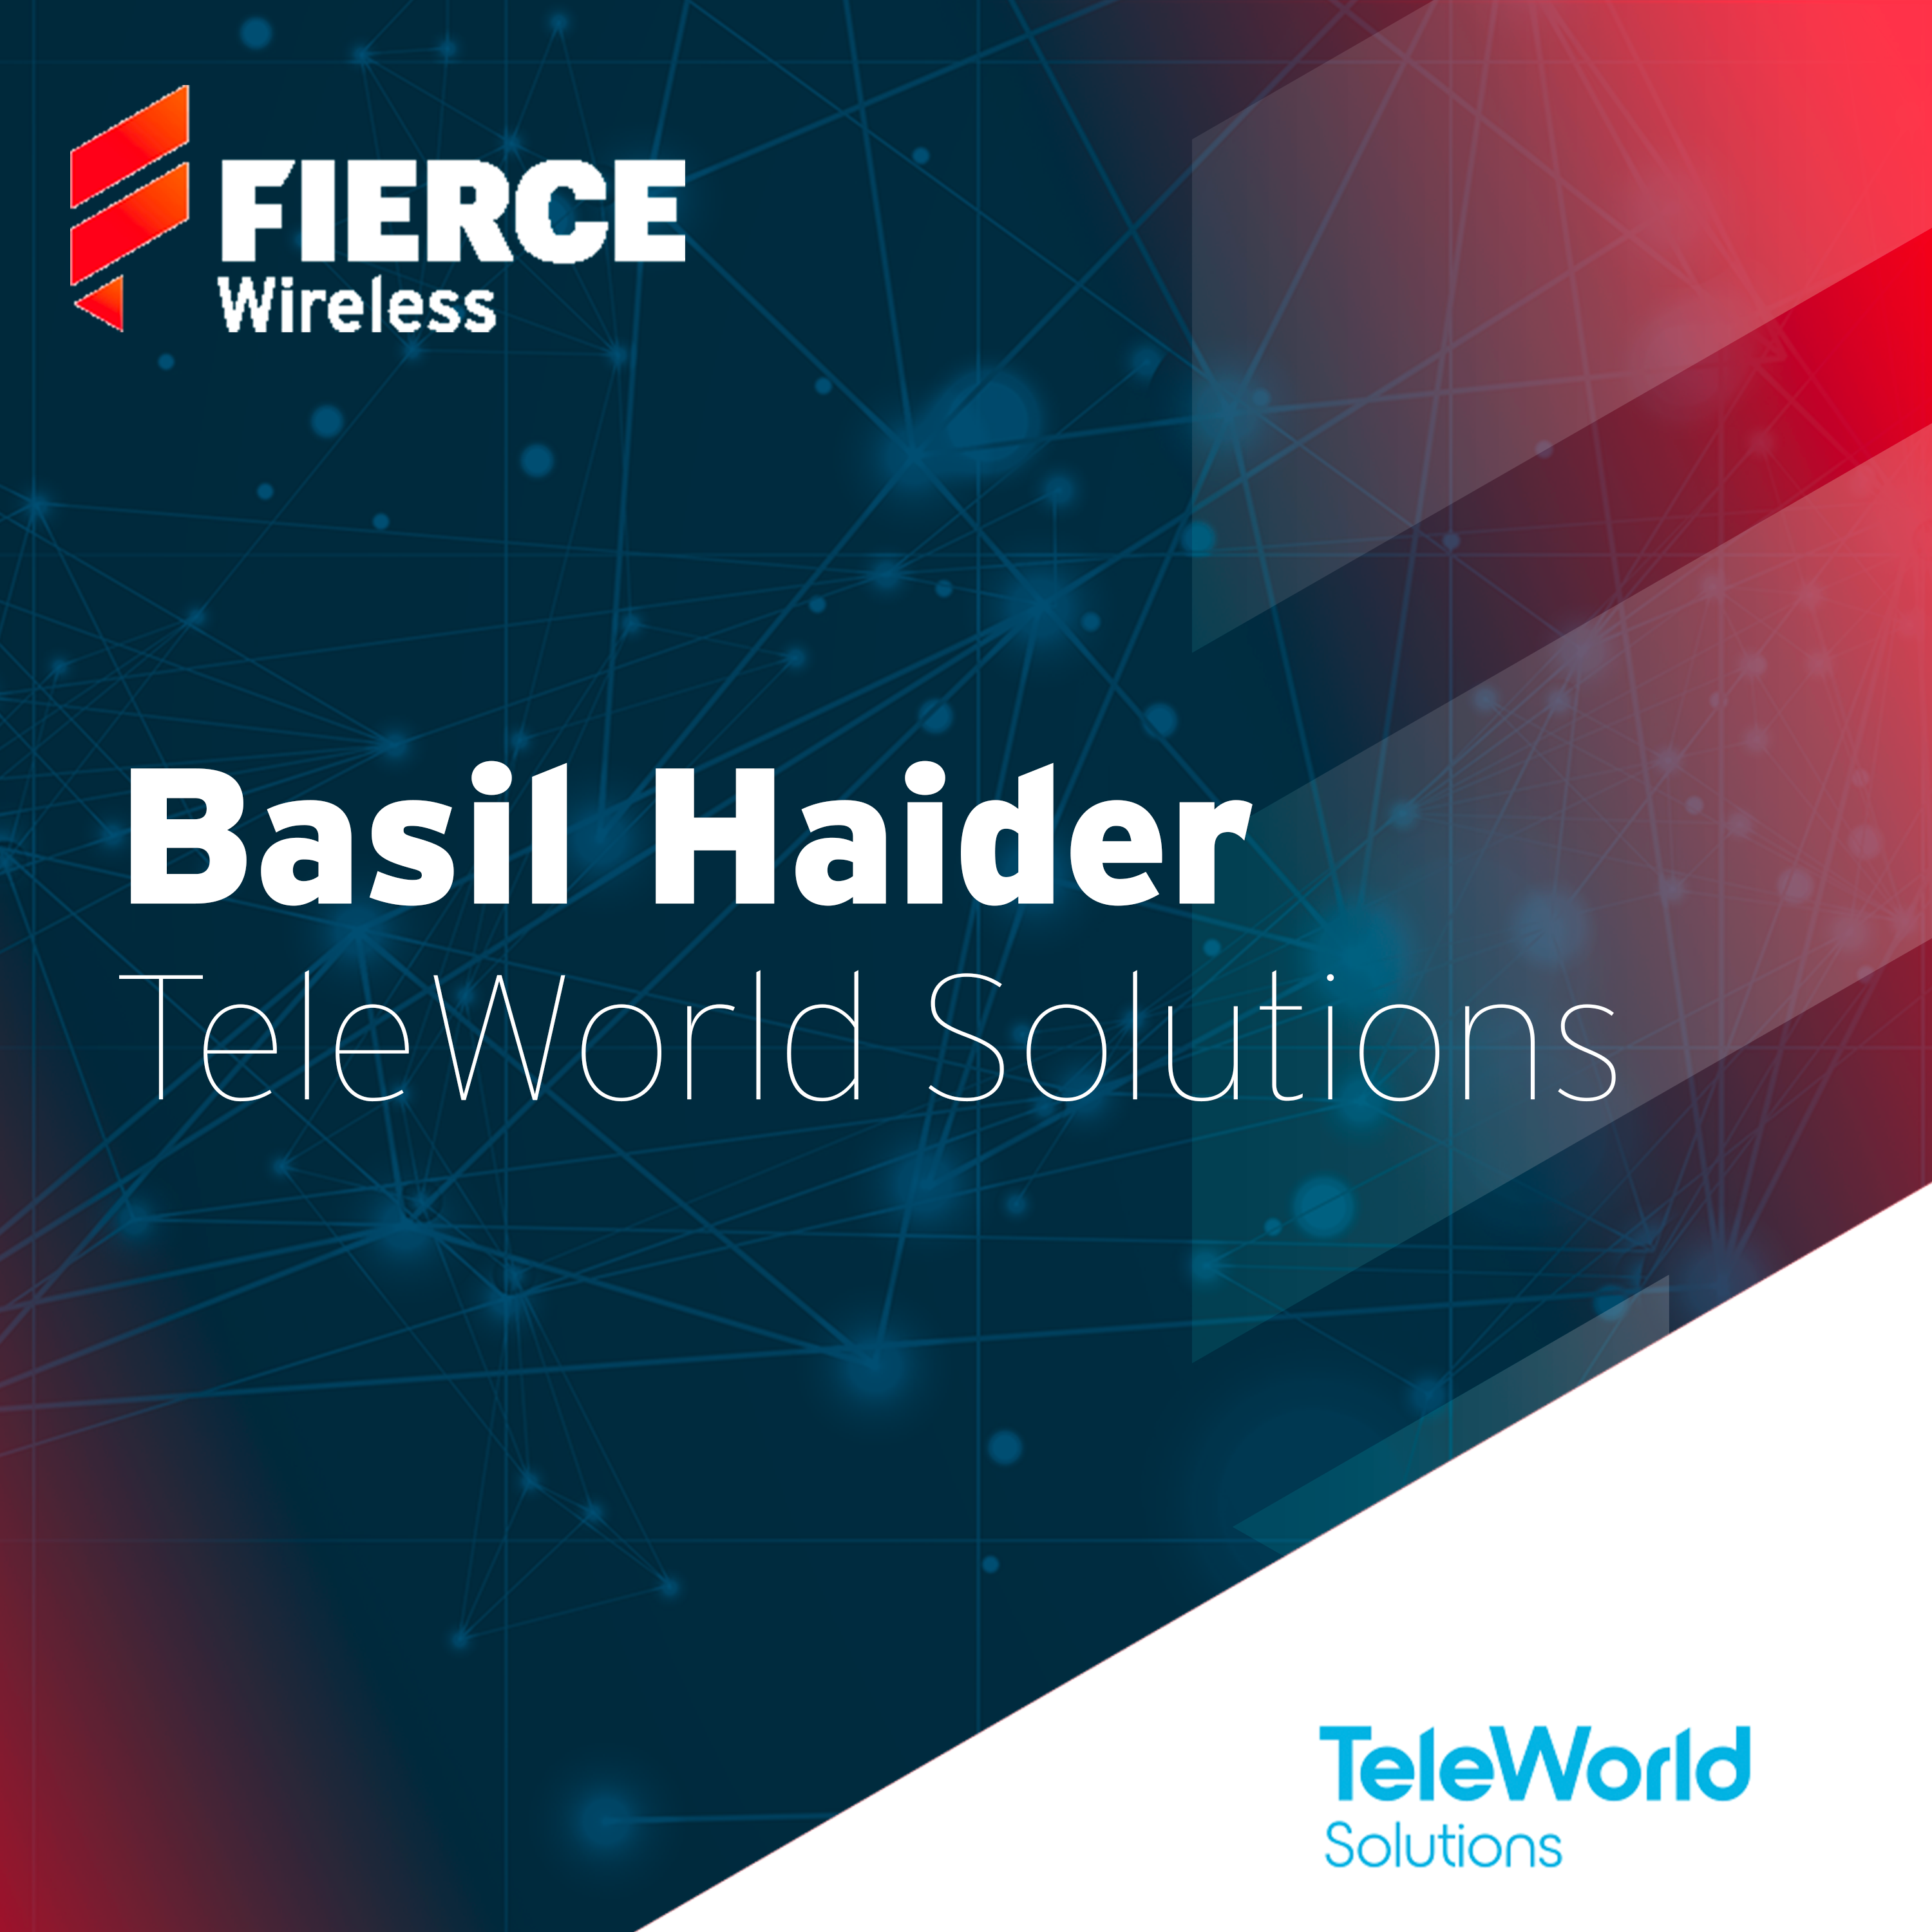 TeleWorld Solutions discusses the ever-advancing world of mobile networks